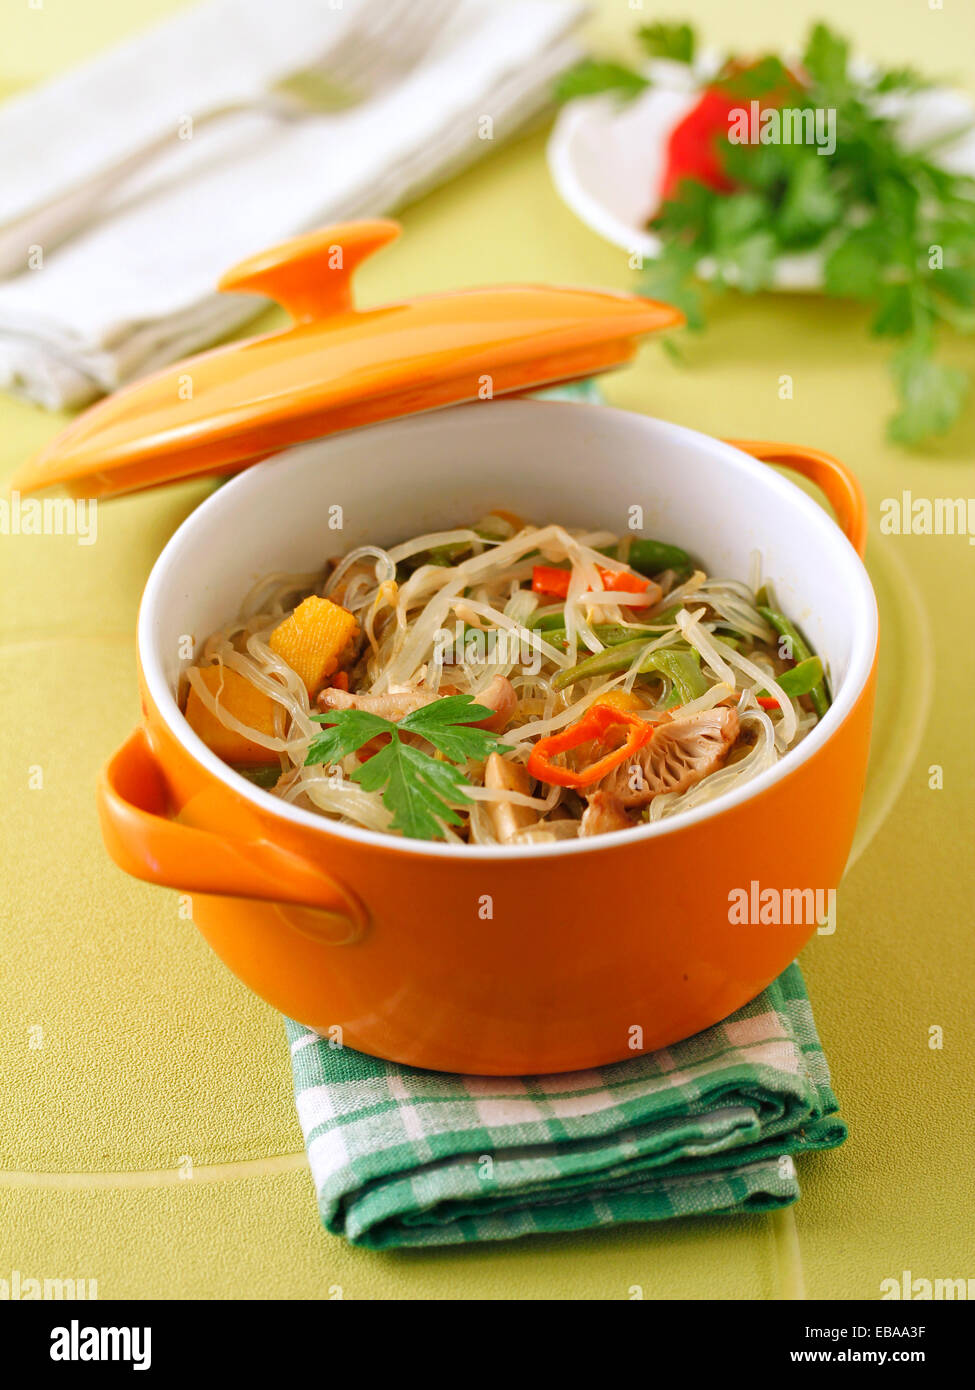 Rice noodles with vegetables. Recipe available. Stock Photo